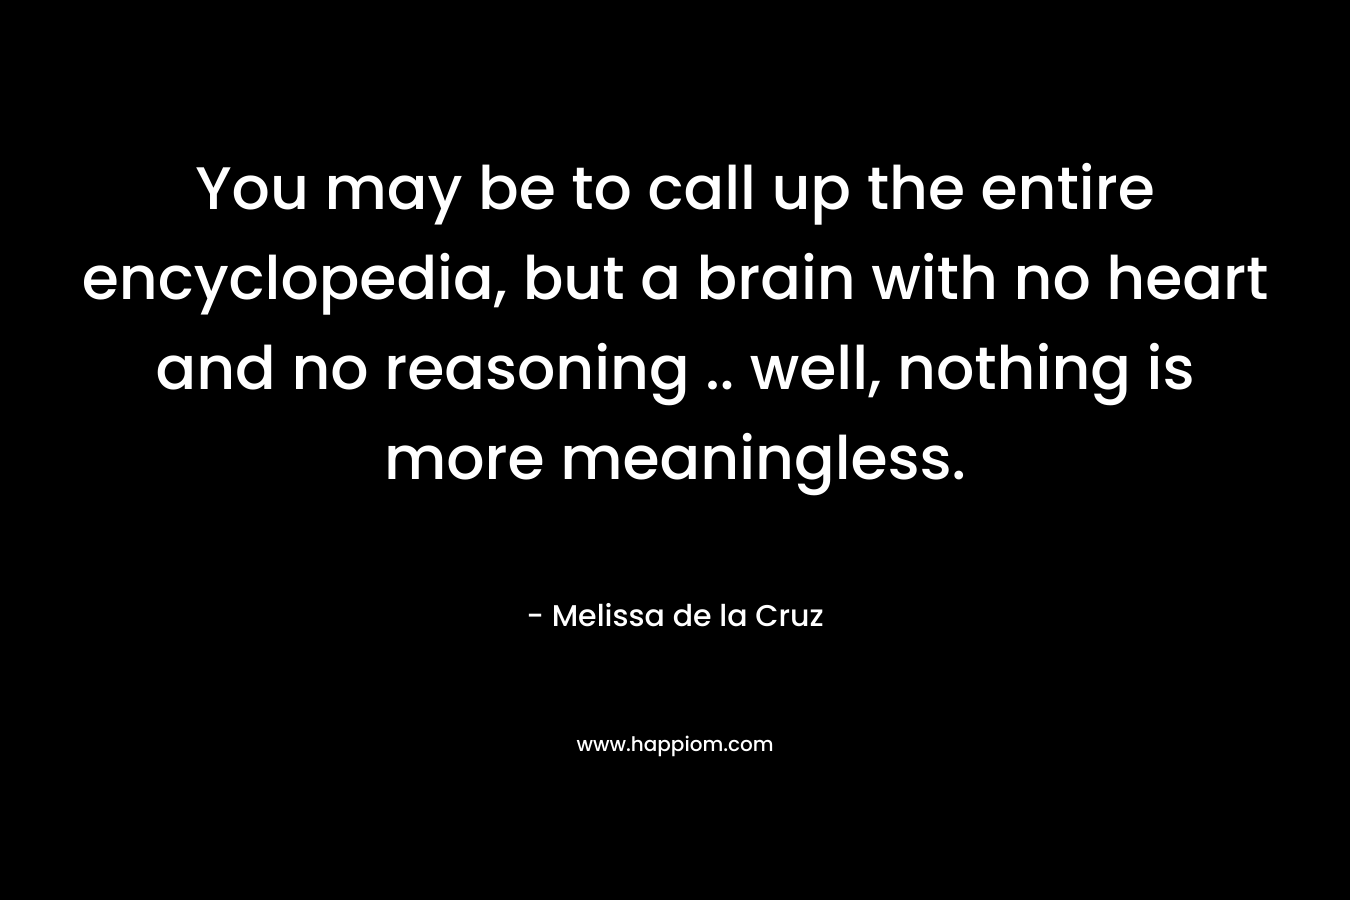 You may be to call up the entire encyclopedia, but a brain with no heart and no reasoning .. well, nothing is more meaningless. – Melissa de la Cruz